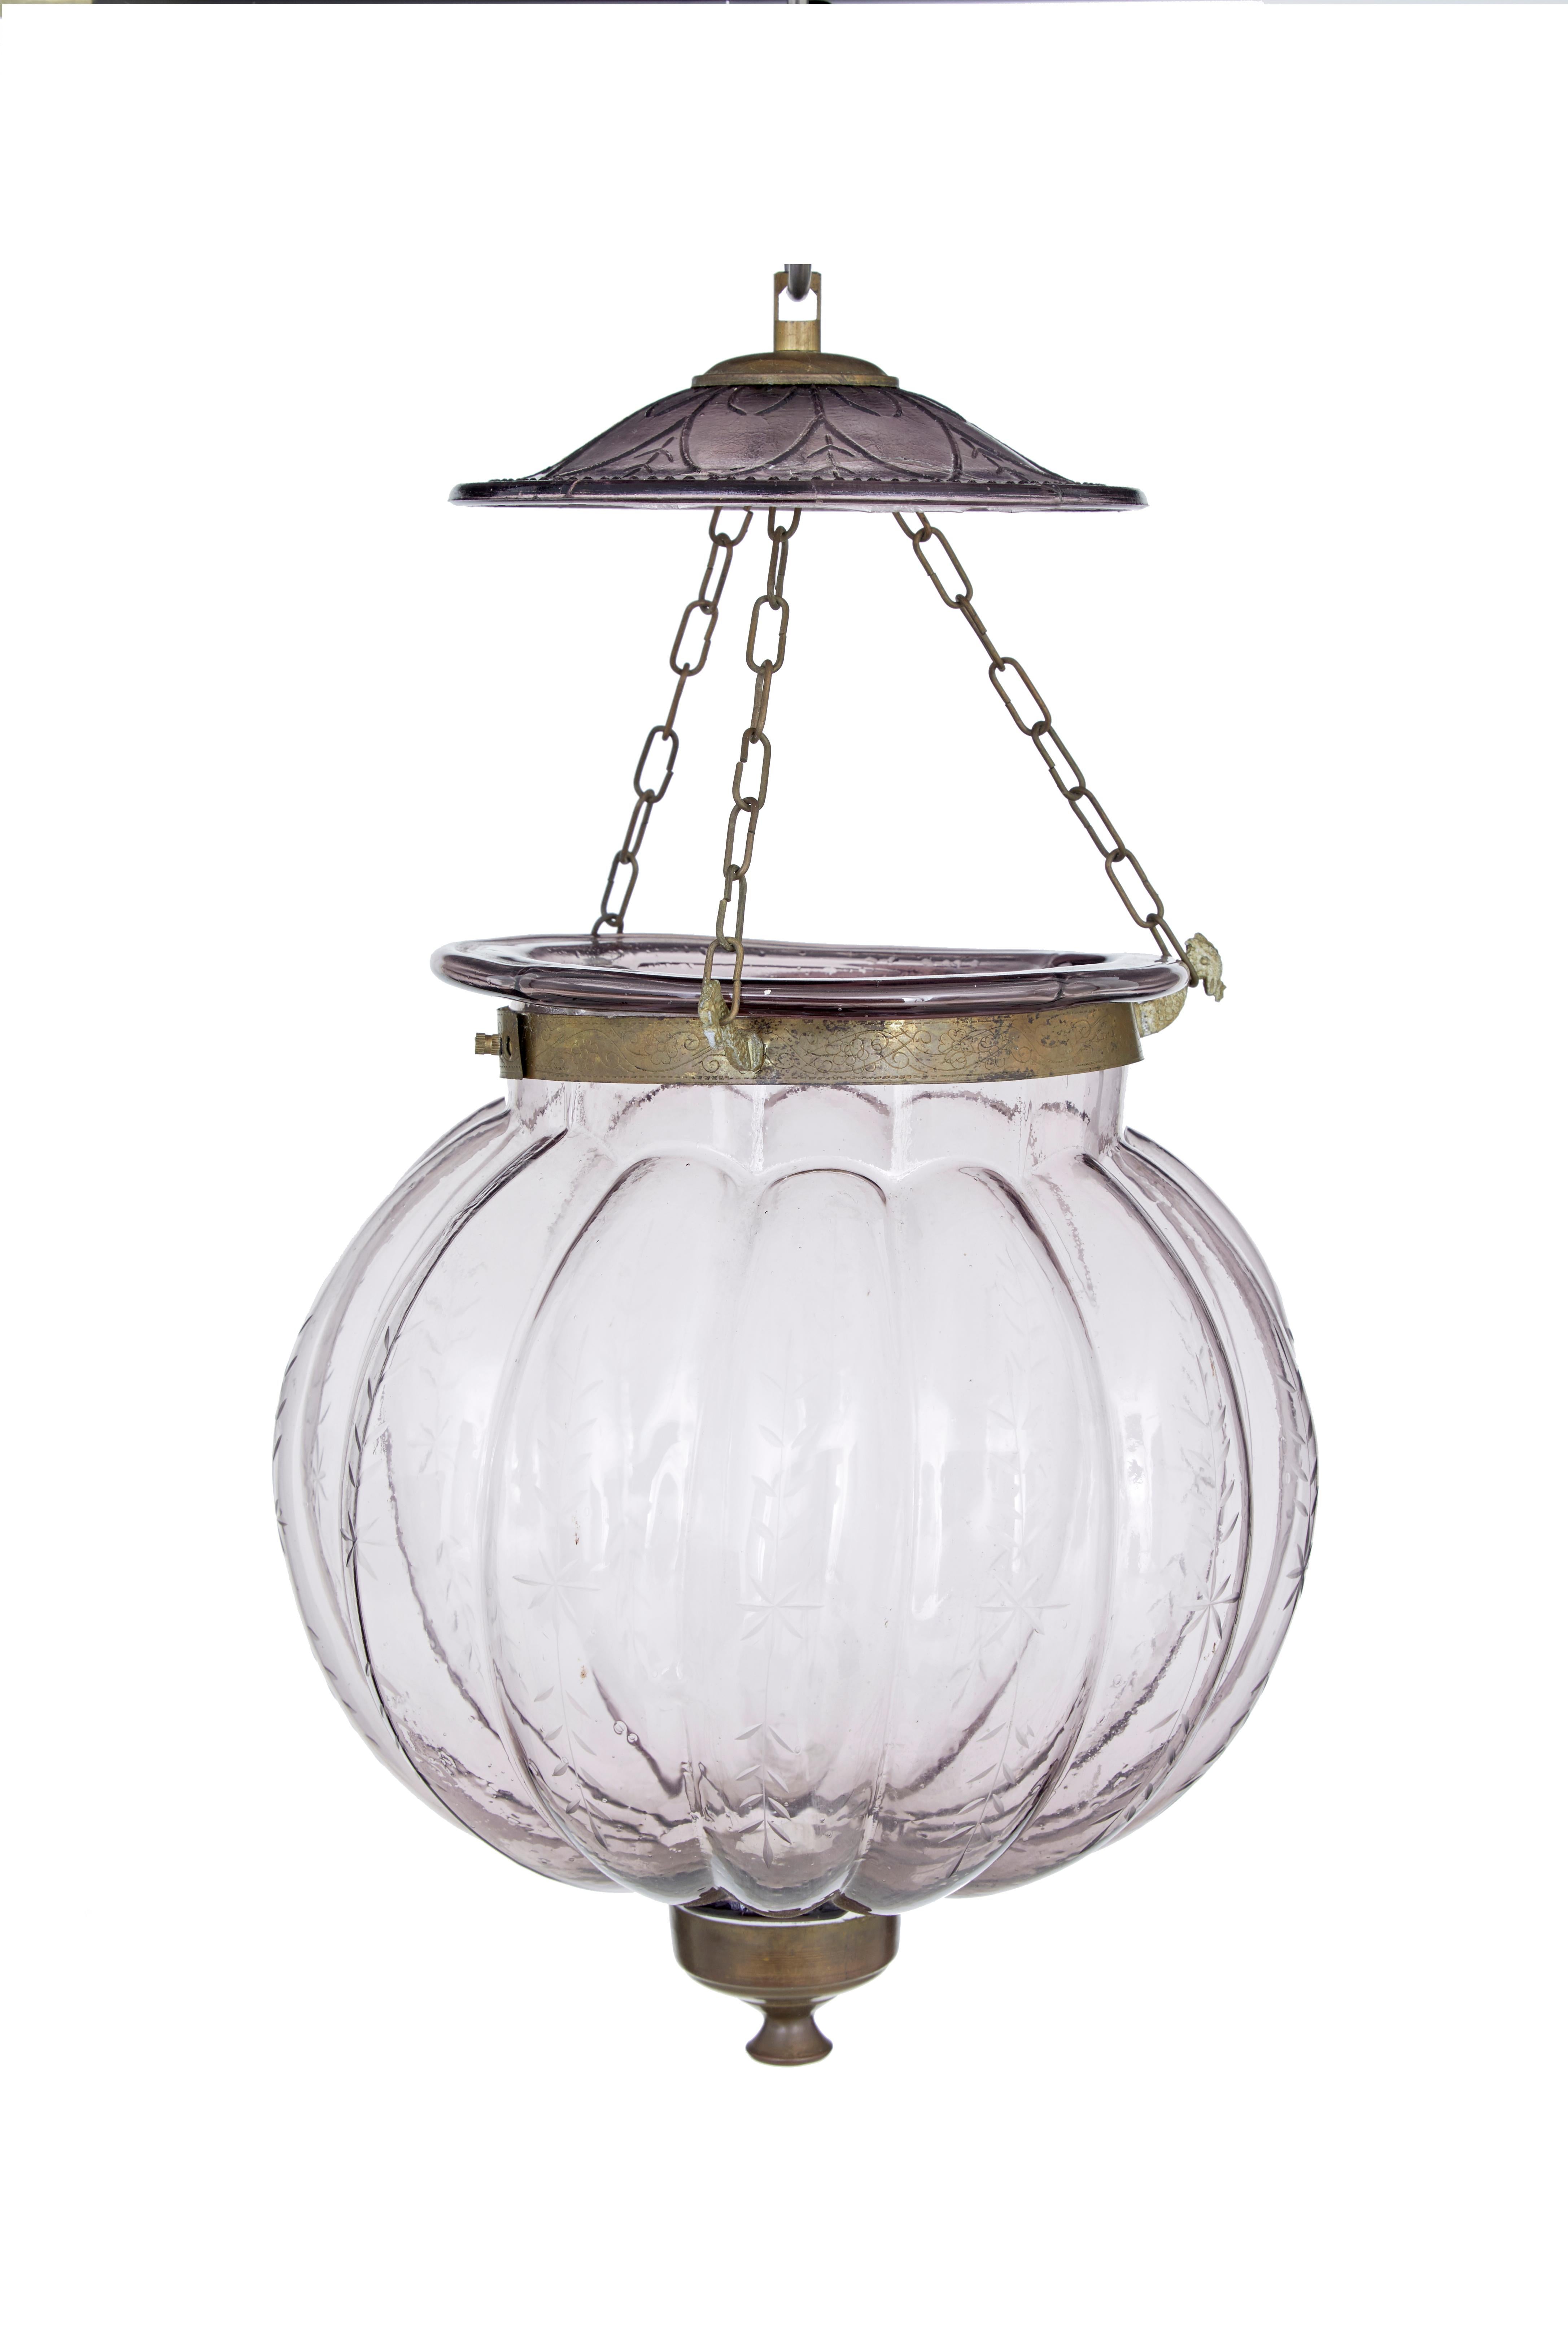 Pair of early 20th century french glass hanging lanterns circa 1920.

Delicate etched pattern along the bulbous organic shaped glass. Linked by 3 chains to the cut glass ceiling mount. Lavender coloured glass.

Restoration to 1 glass lid, which is